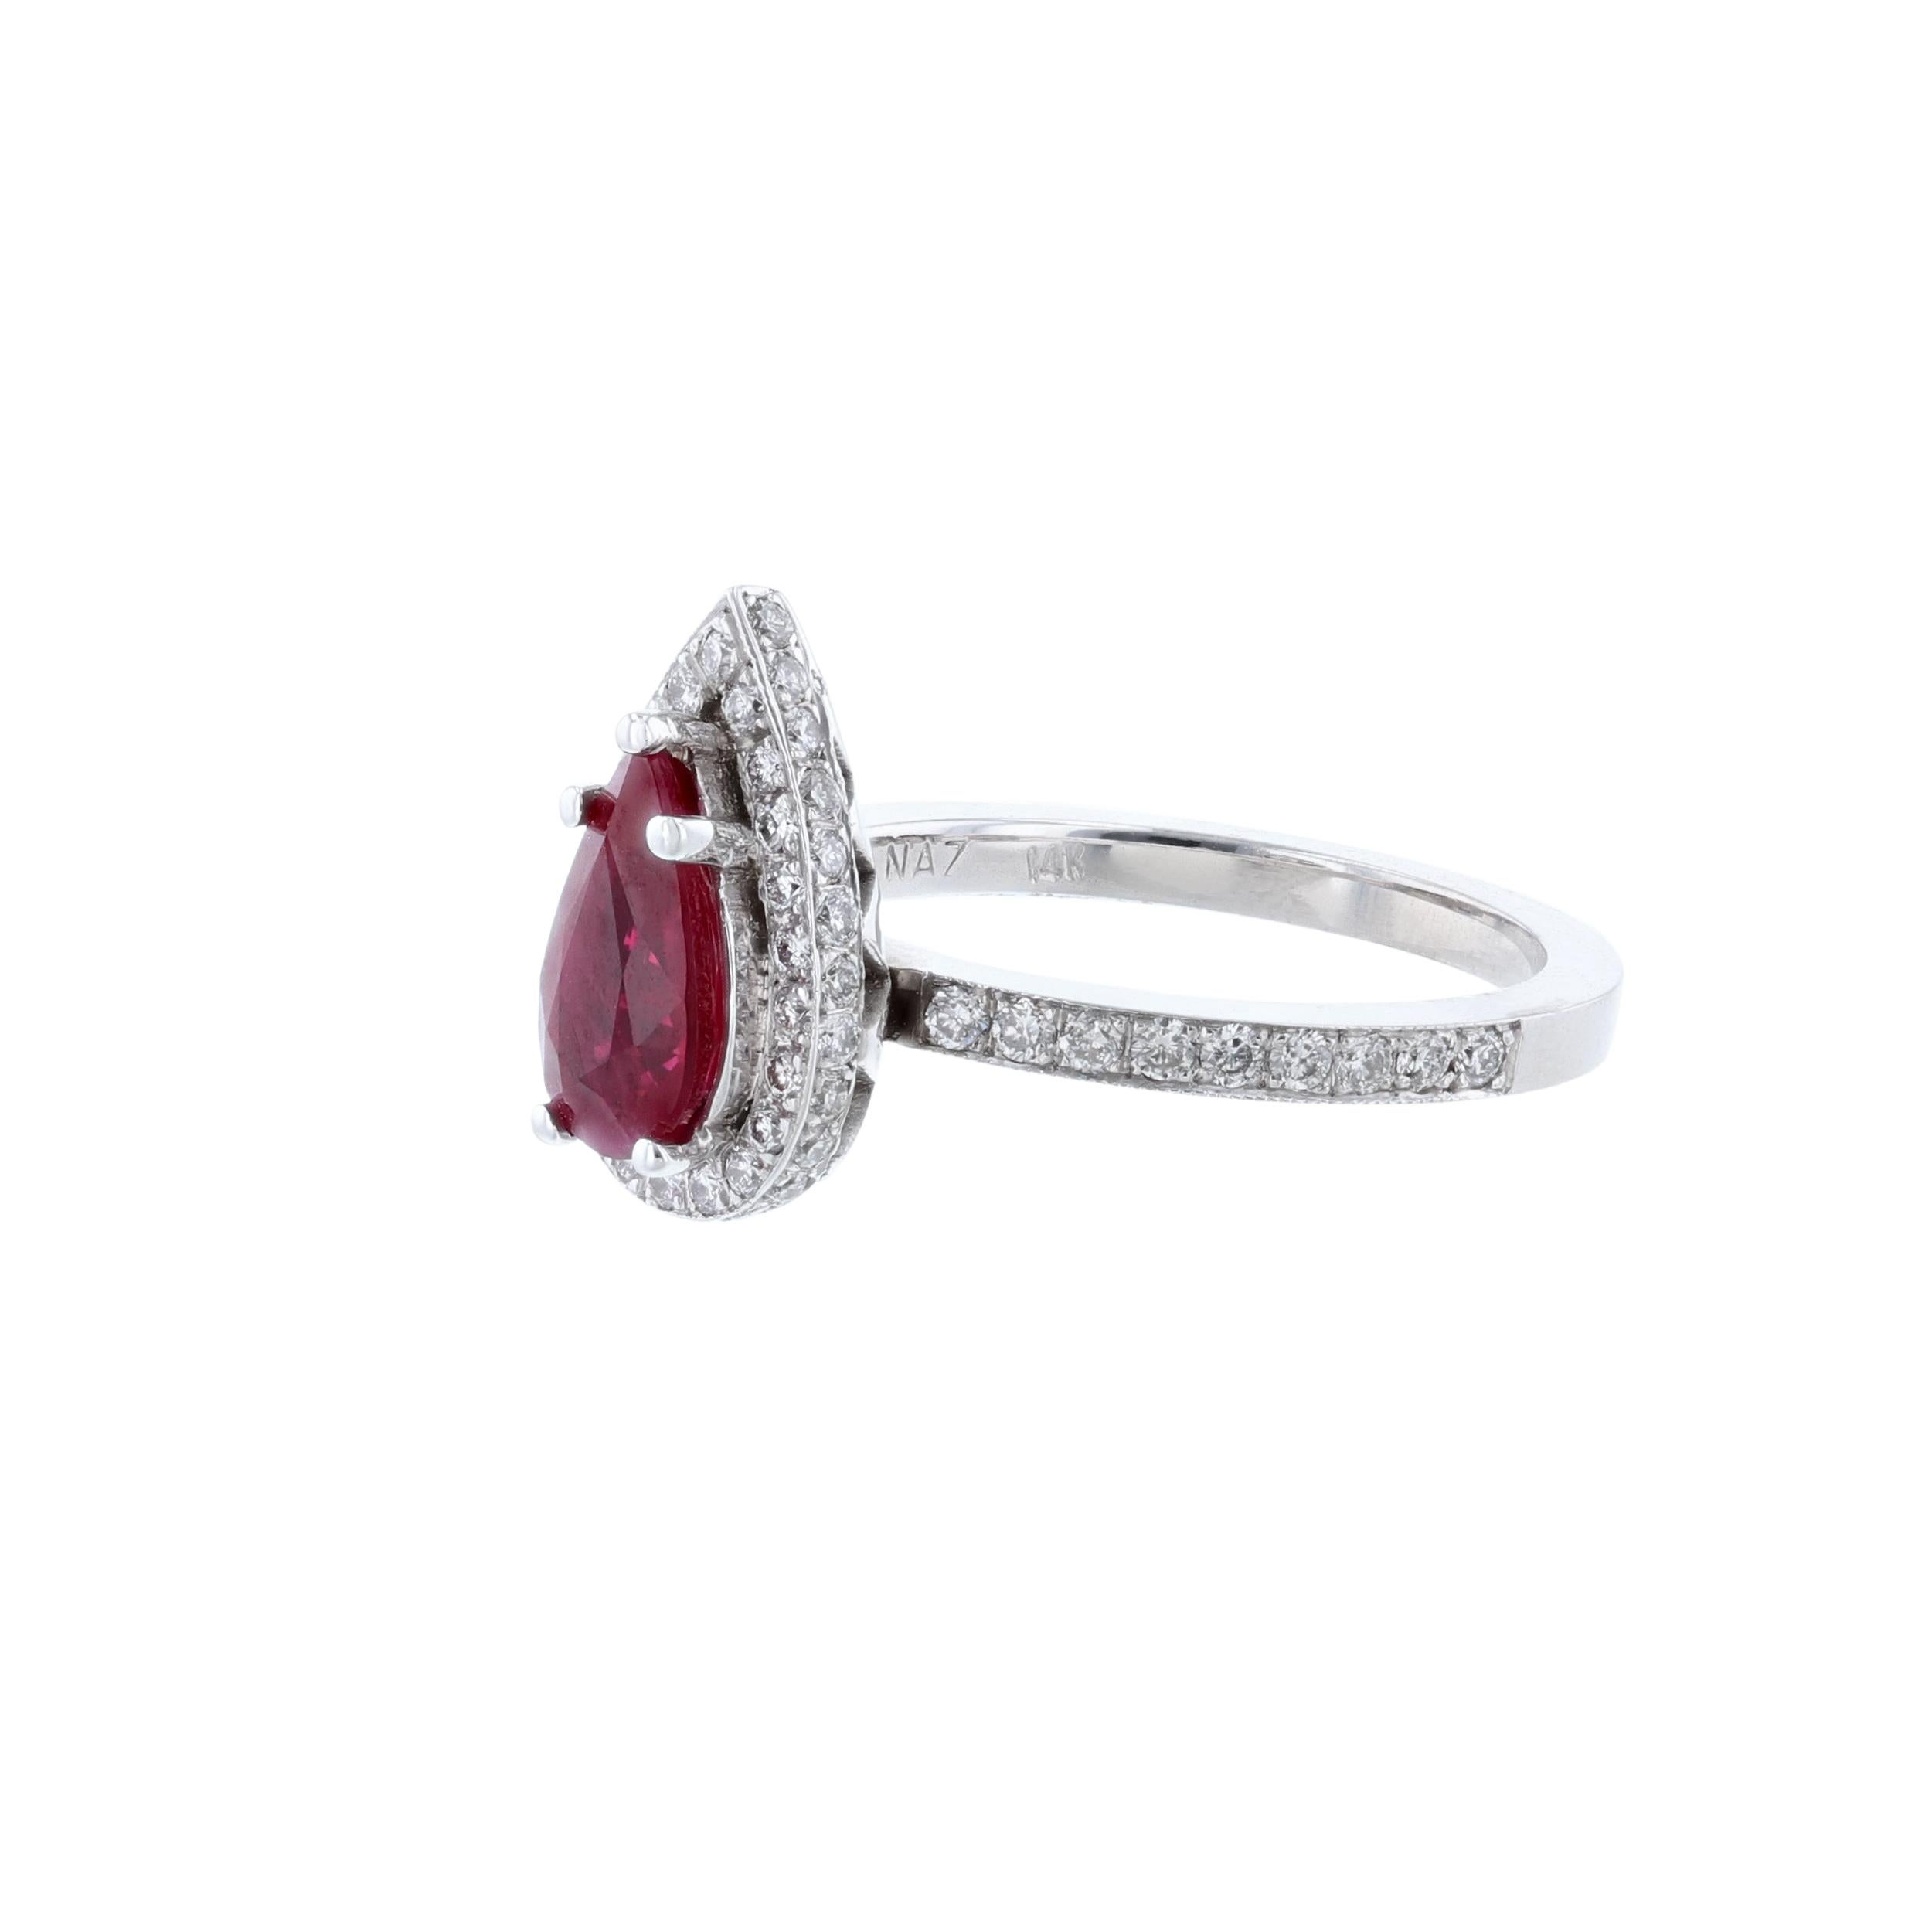 This ring is made in 14K white gold ring. It features 1 pear shape ruby weighing 1.46 carats. Also includes 68 round cut diamonds weighing 0.55 carats. With a color grade (H) and clarity grade (SI2)